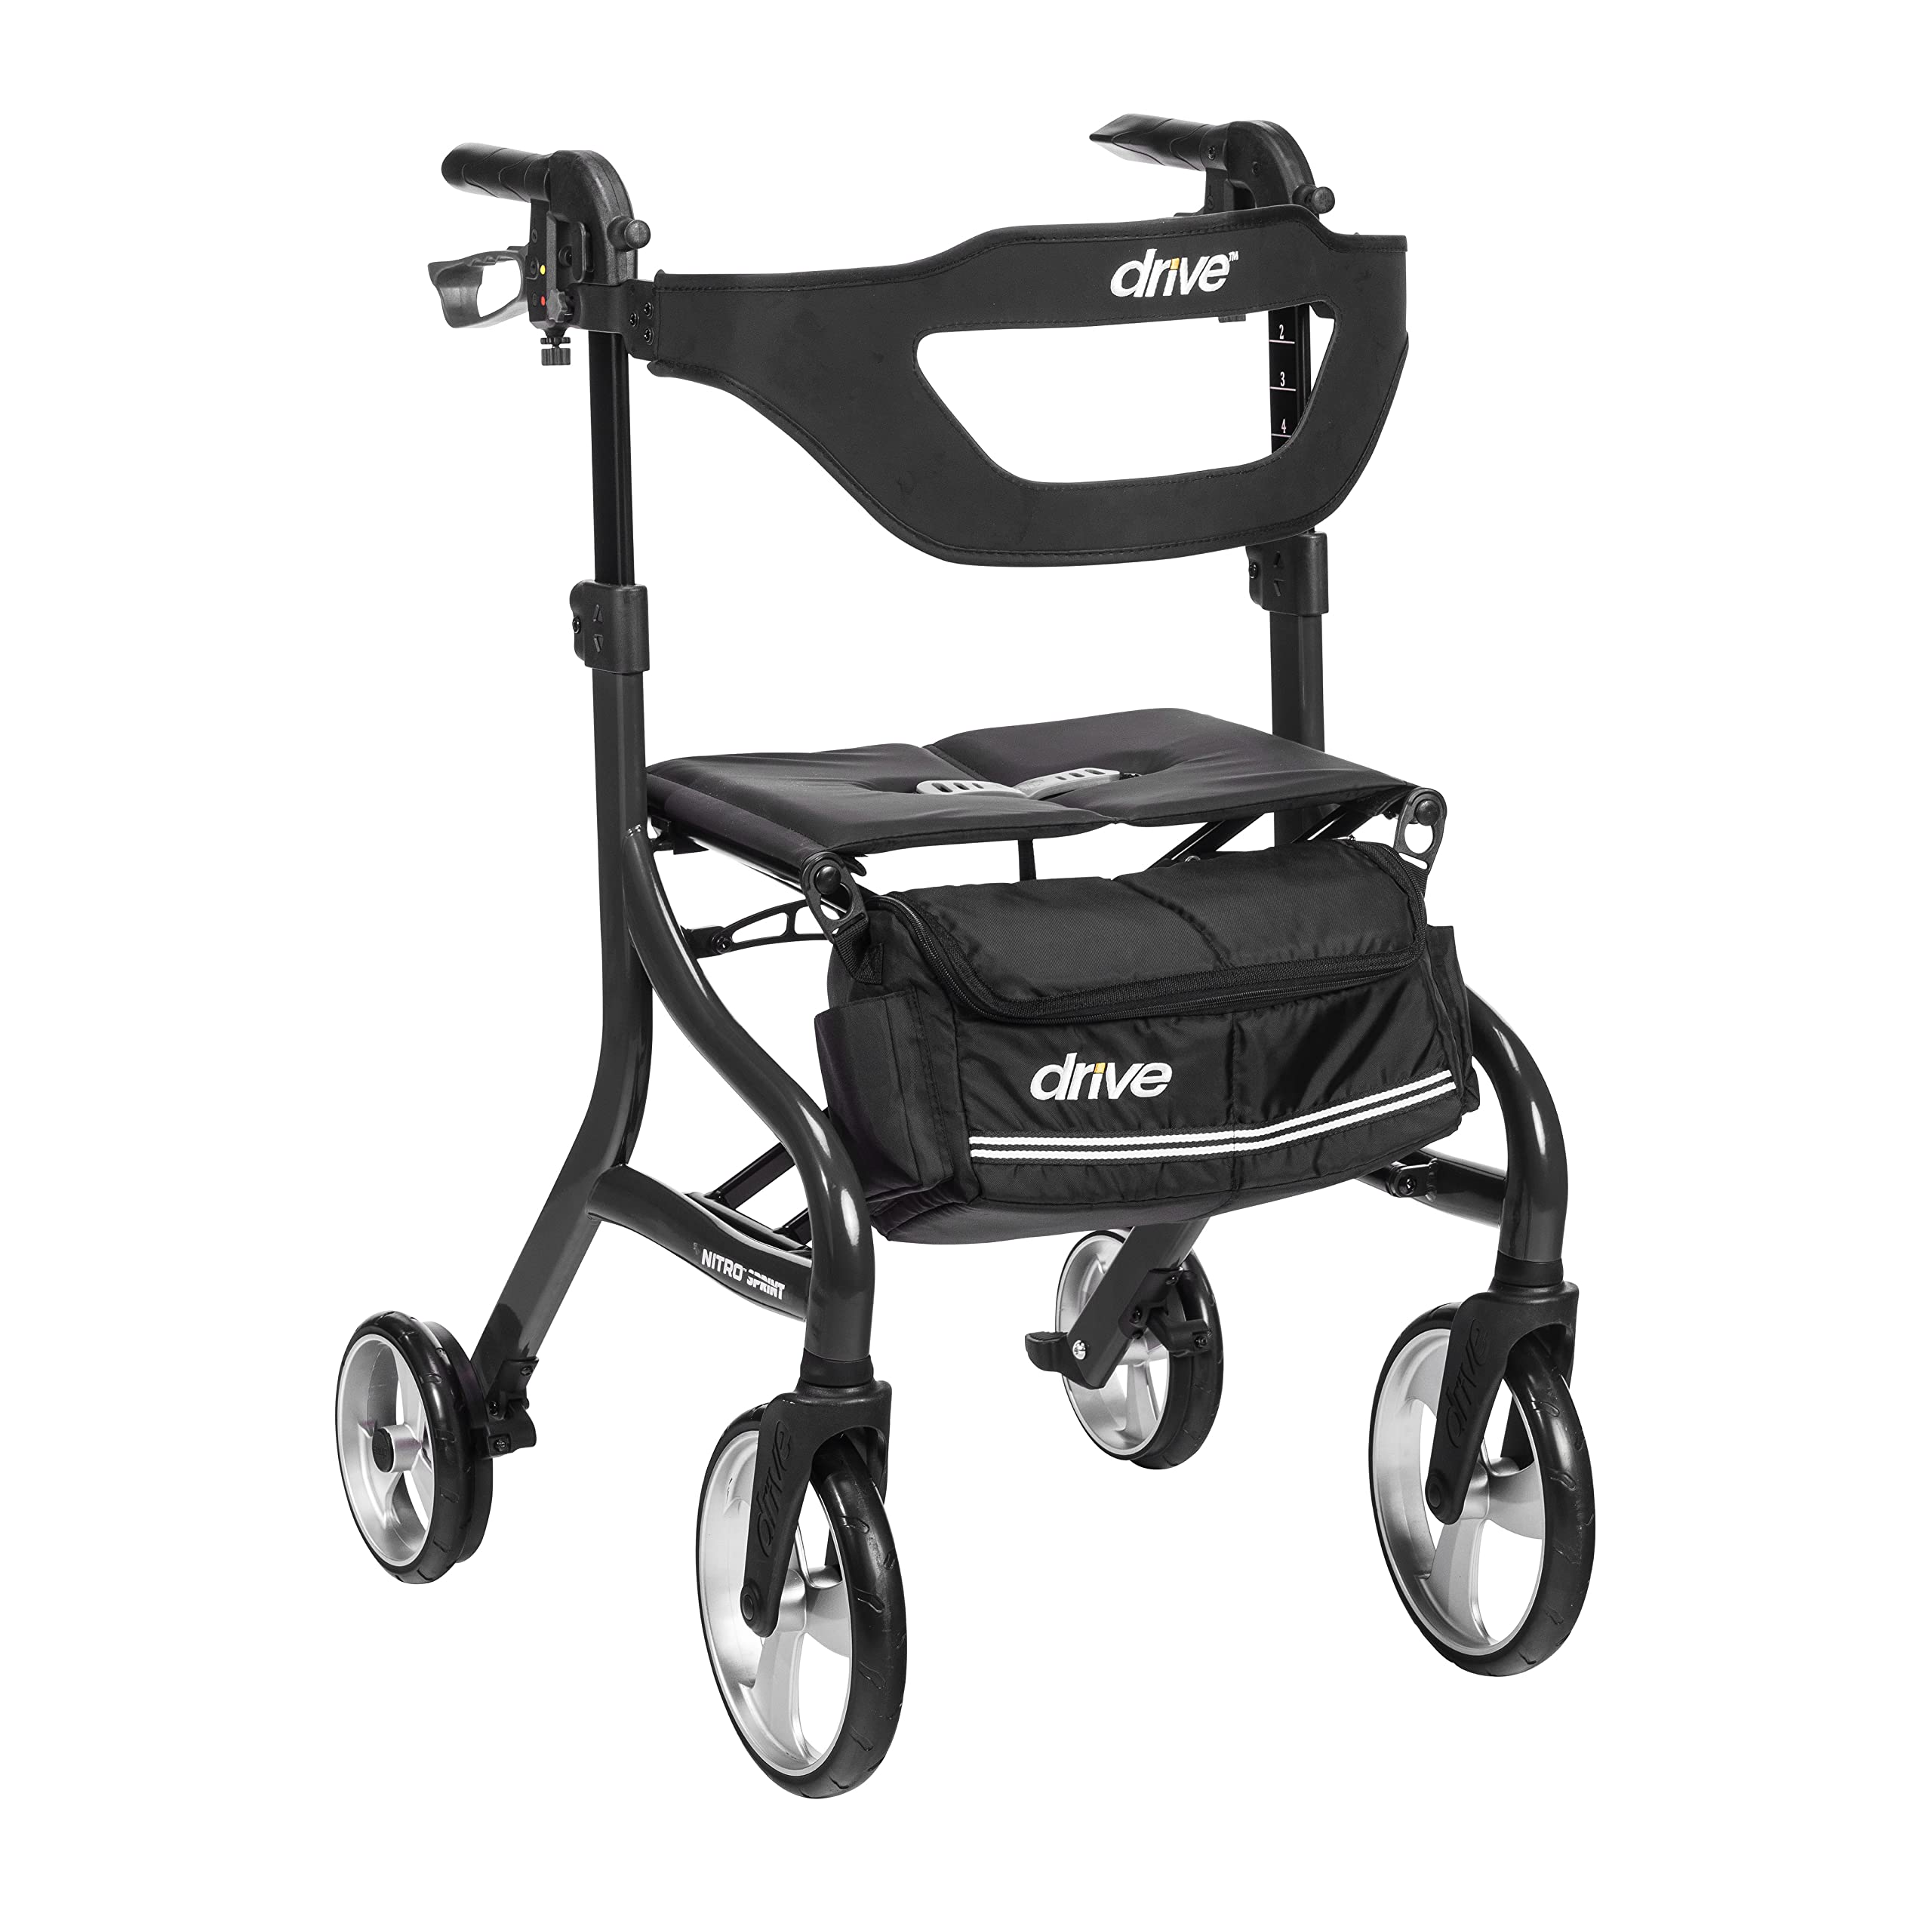 Drive Medical Nitro Sprint Foldable Rollator Walker with Seat, Tall Height Lightweight Rollator with Large Wheels, Folding Rollator, Four Wheel Rolling Walker, Black